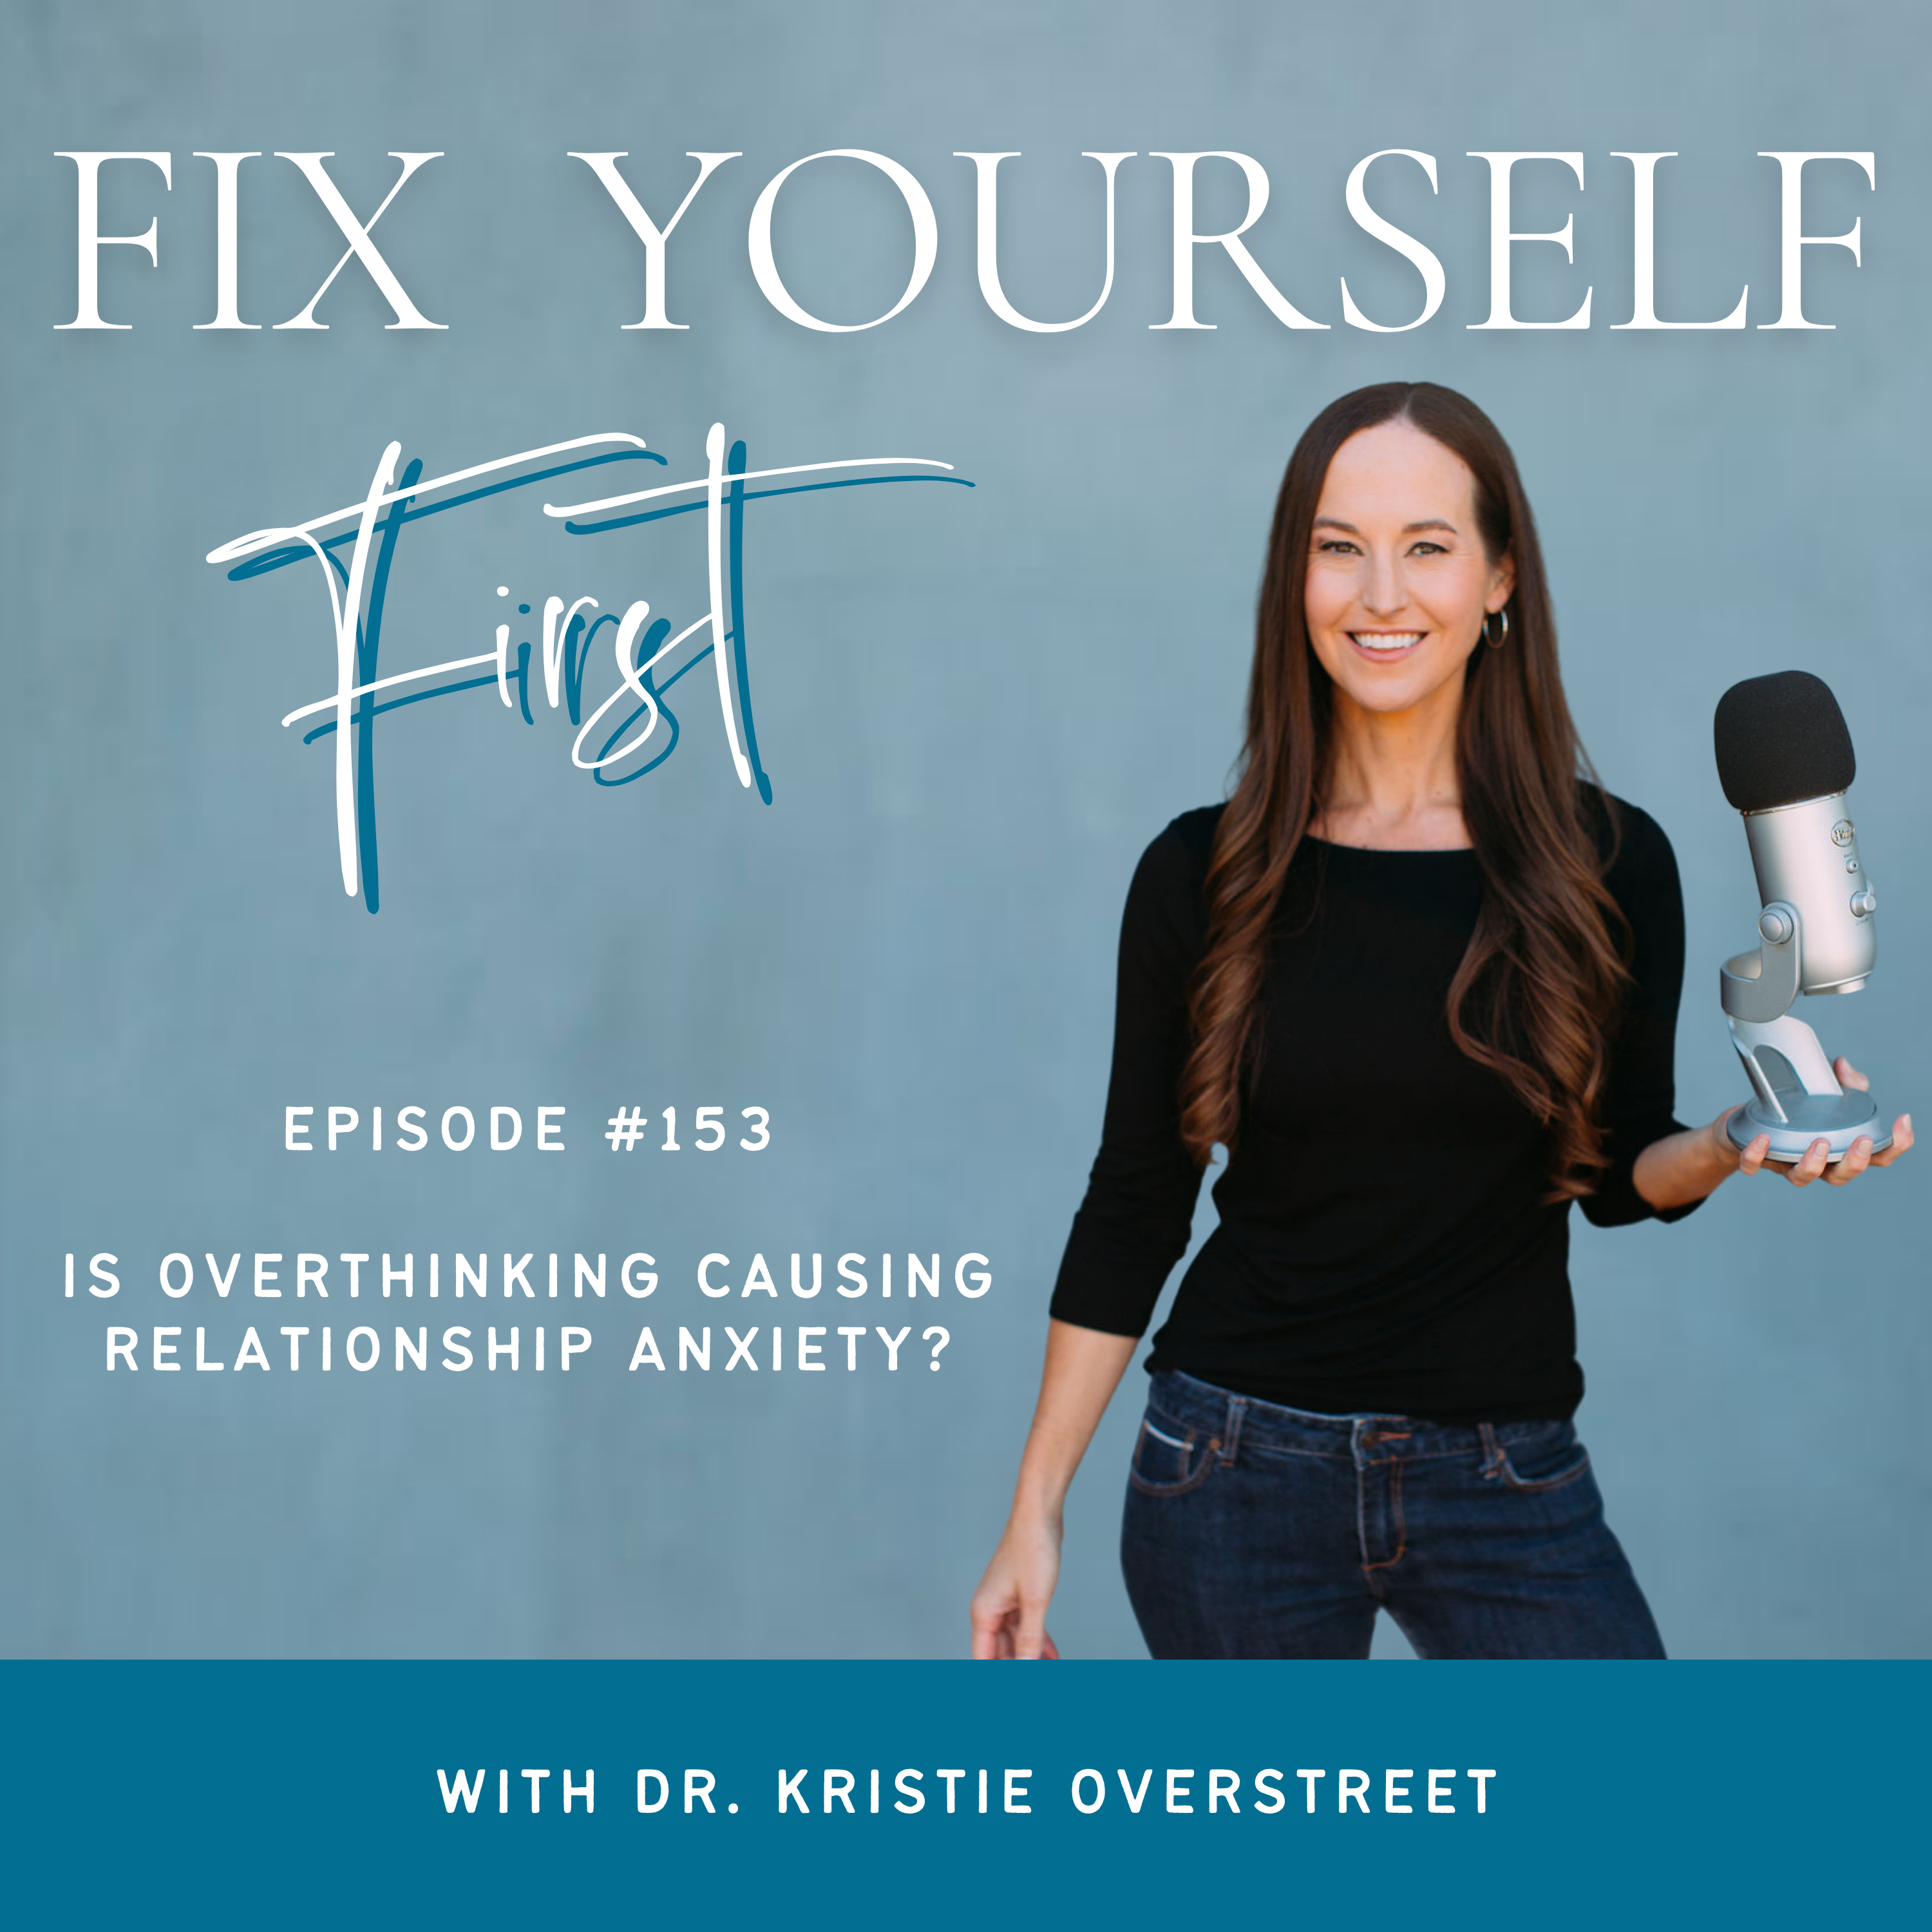 Fix Yourself First Episode 153 Is Overthinking Causing Relationship Anxiety?